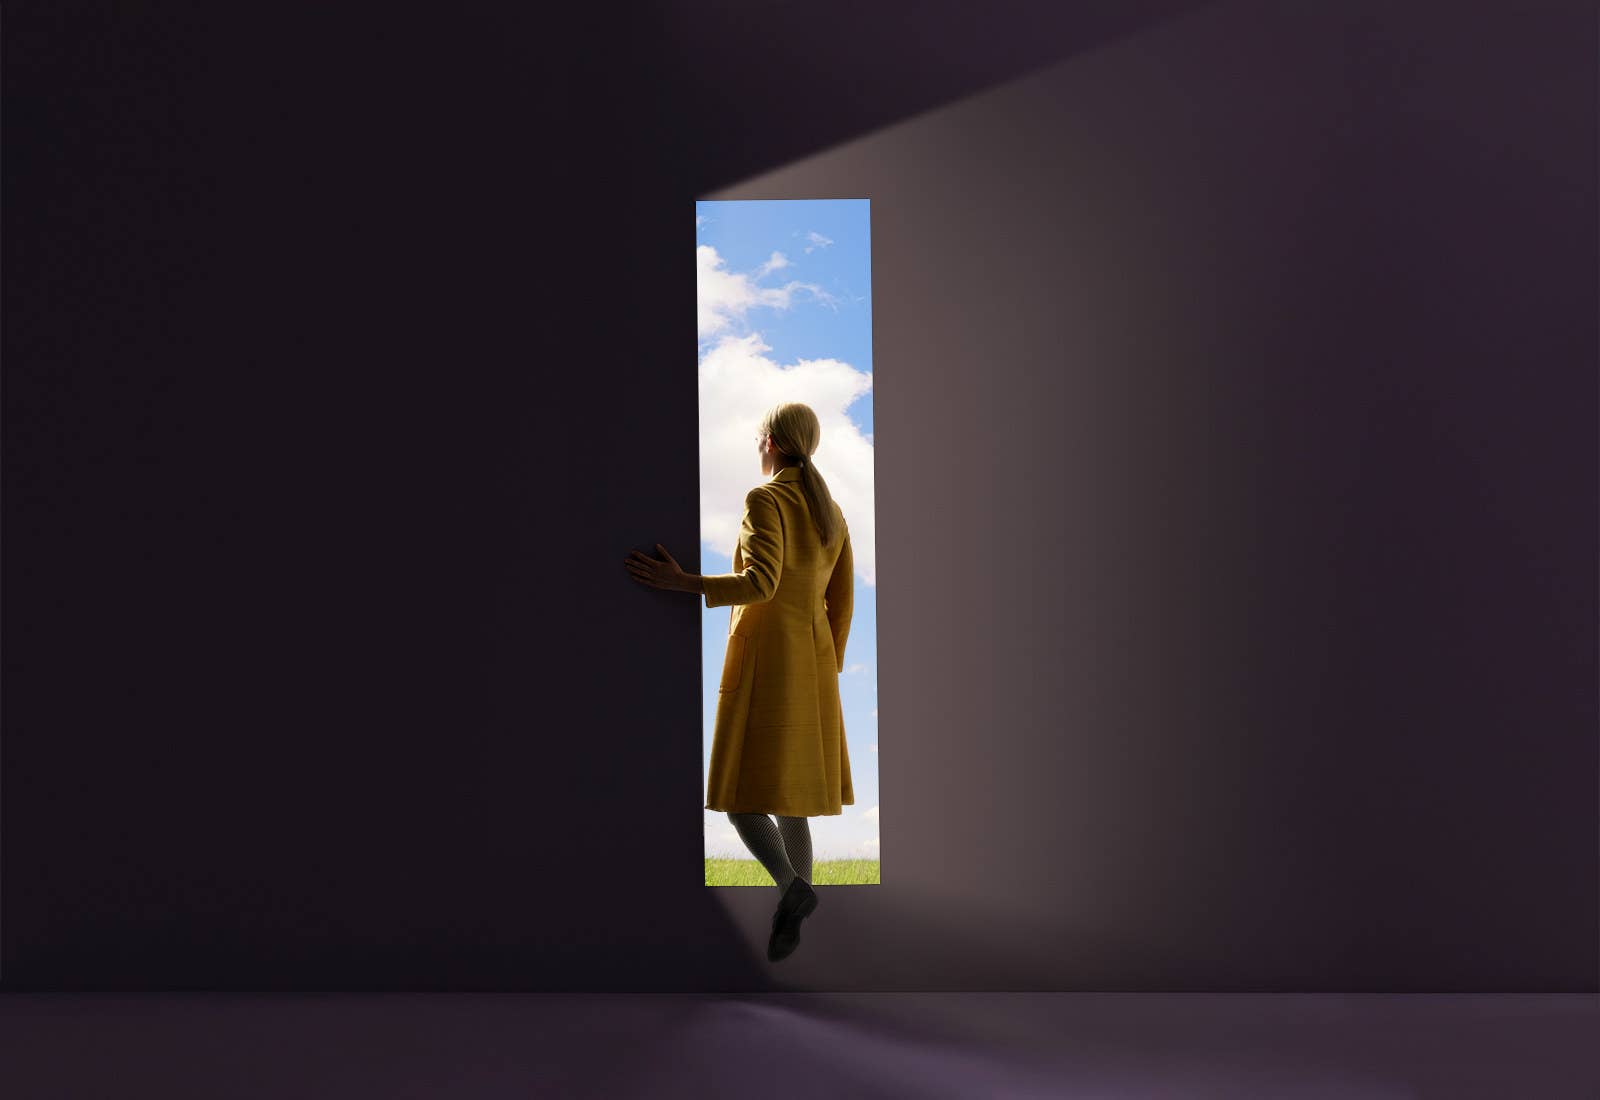 An illustration of a woman standing in a doorway